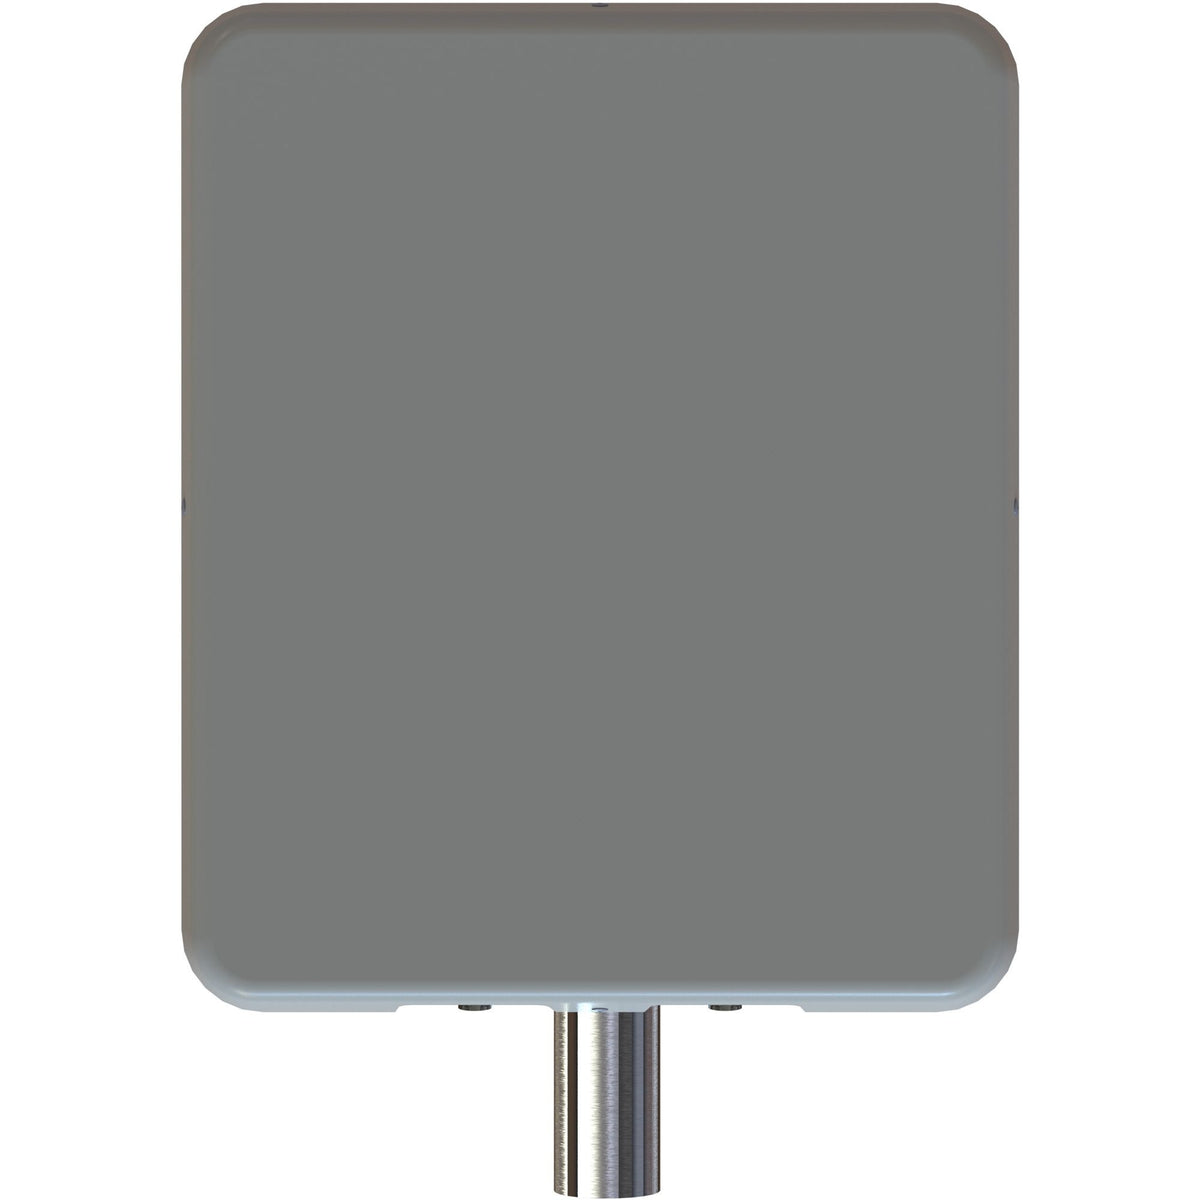 Parsec Great Dane Series - Roof Mount Omnidirectional Antenna - PTAGD2L50